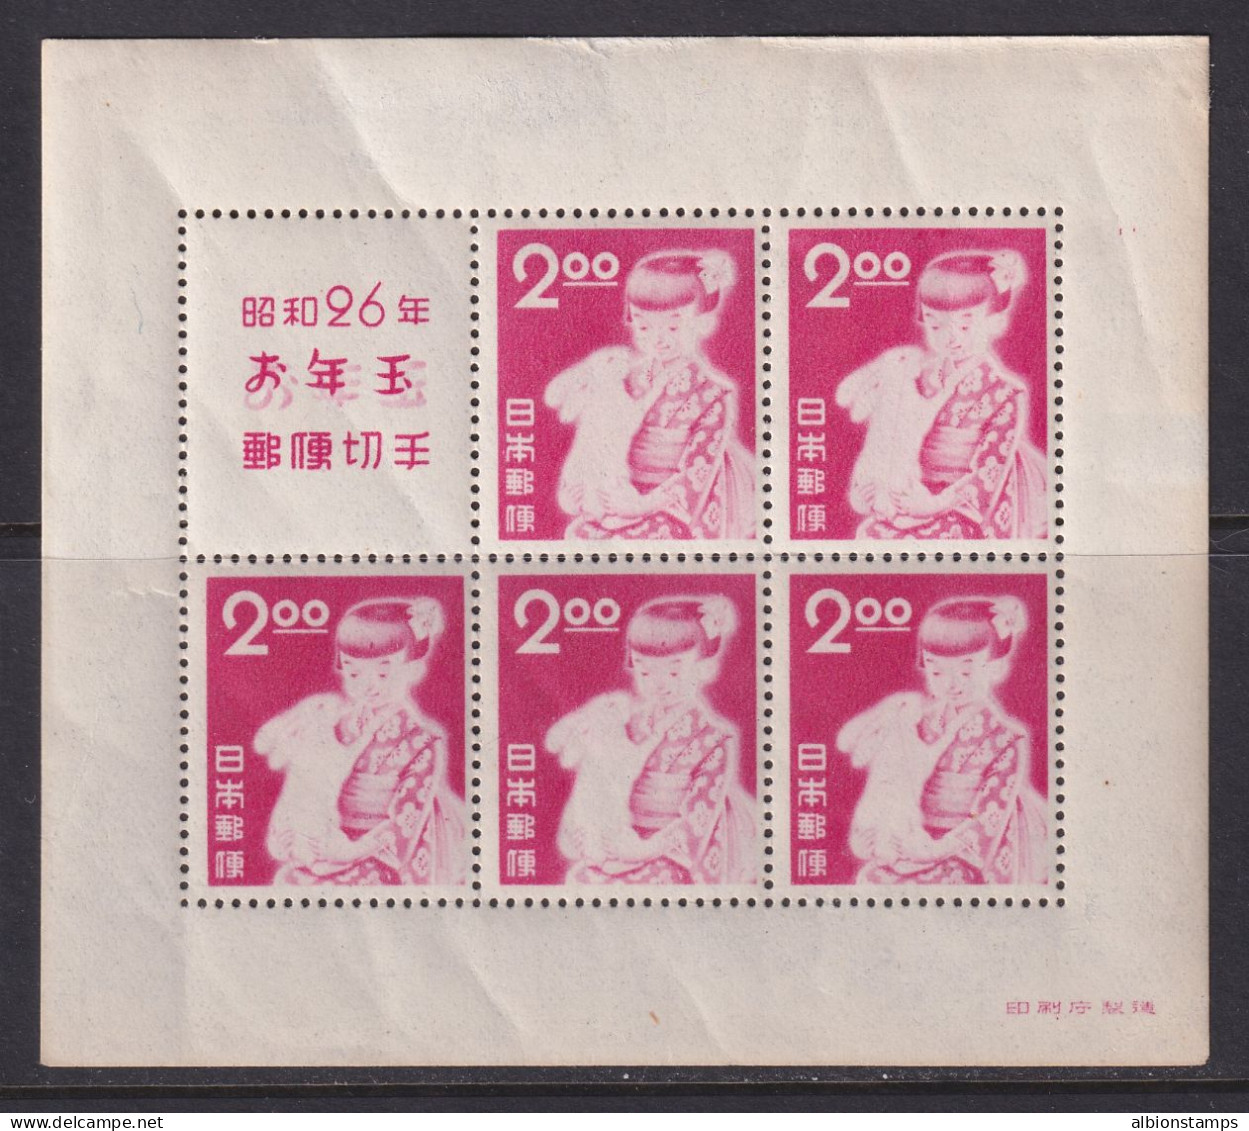 Japan, Scott 522, MLH (small Thin Selvage) Souvenir Sheet - Unused Stamps